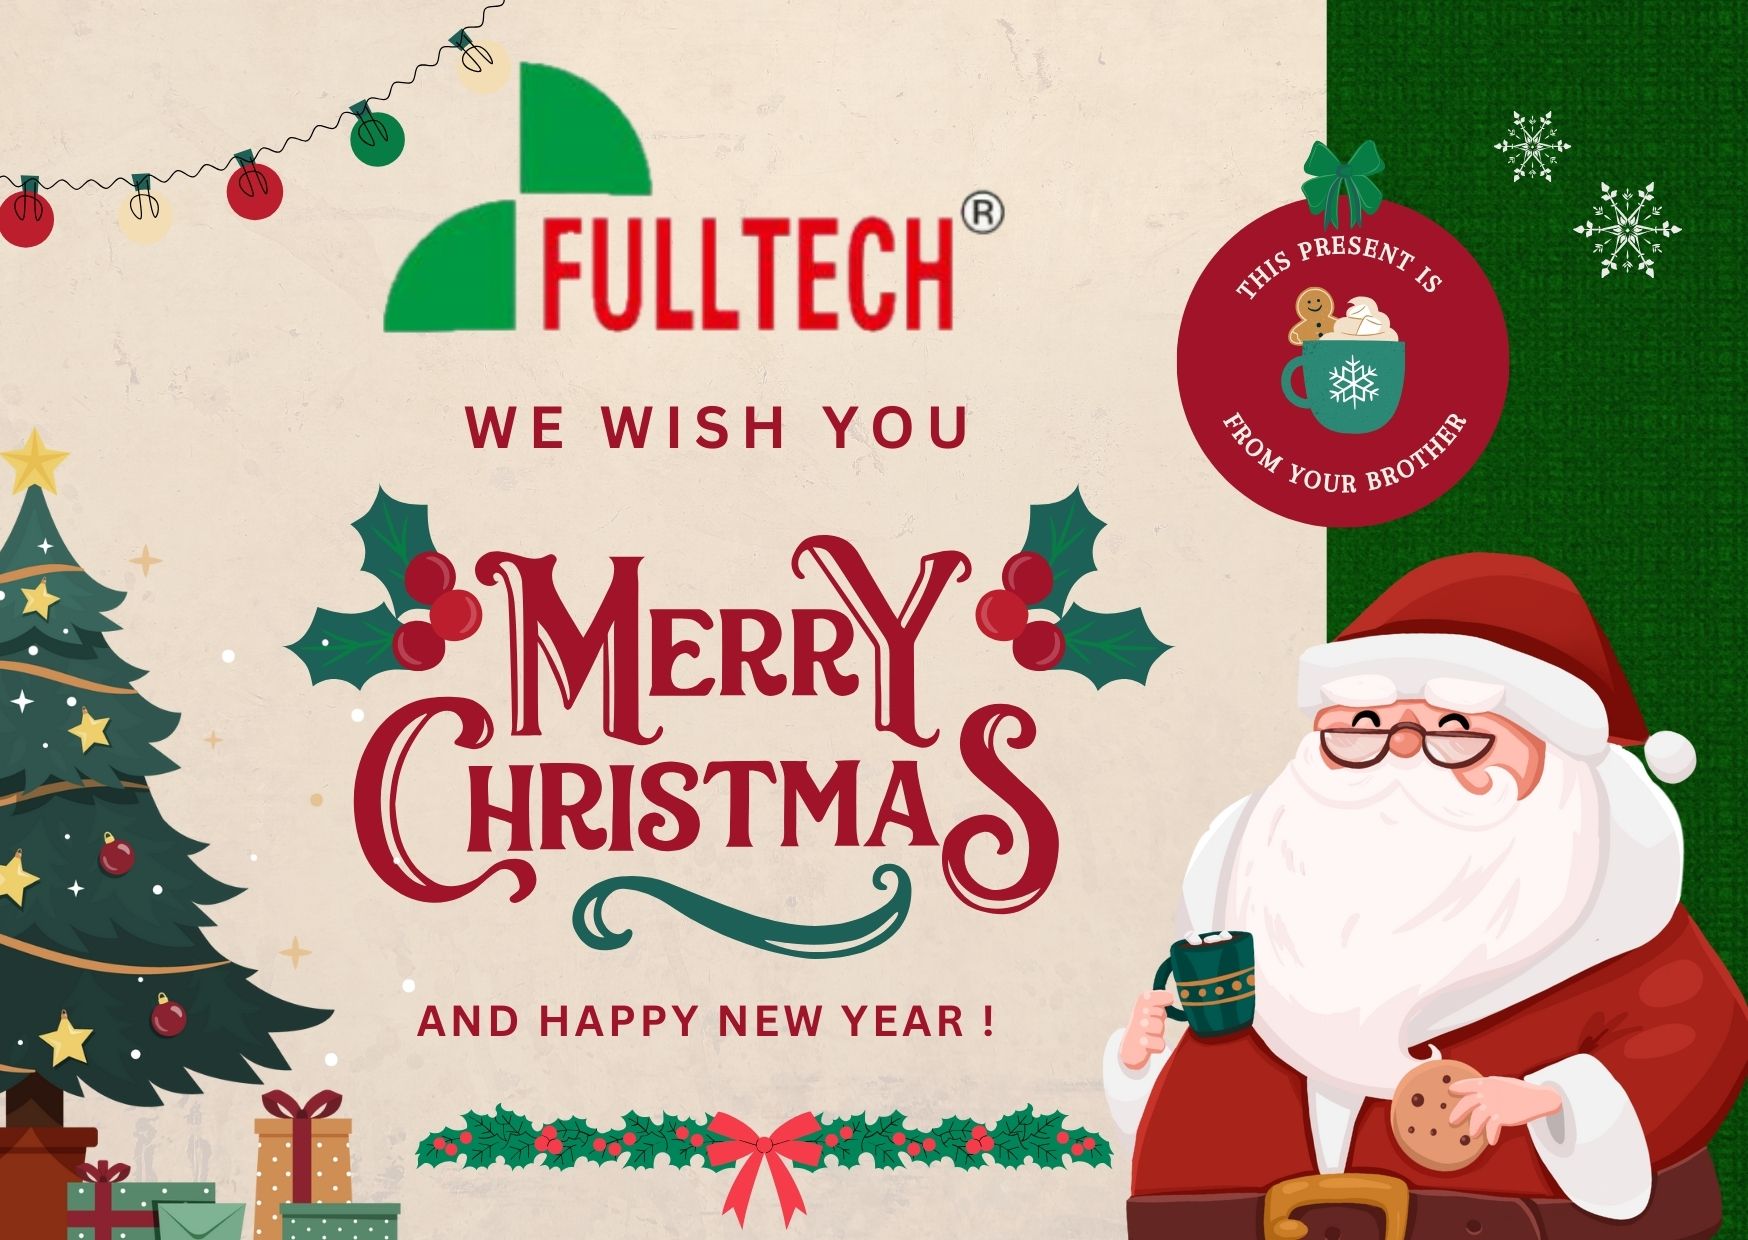 Fulltech Electric Wishes You a Merry Christmas, May Your Holidays Be Filled with Laughter and Warmth!